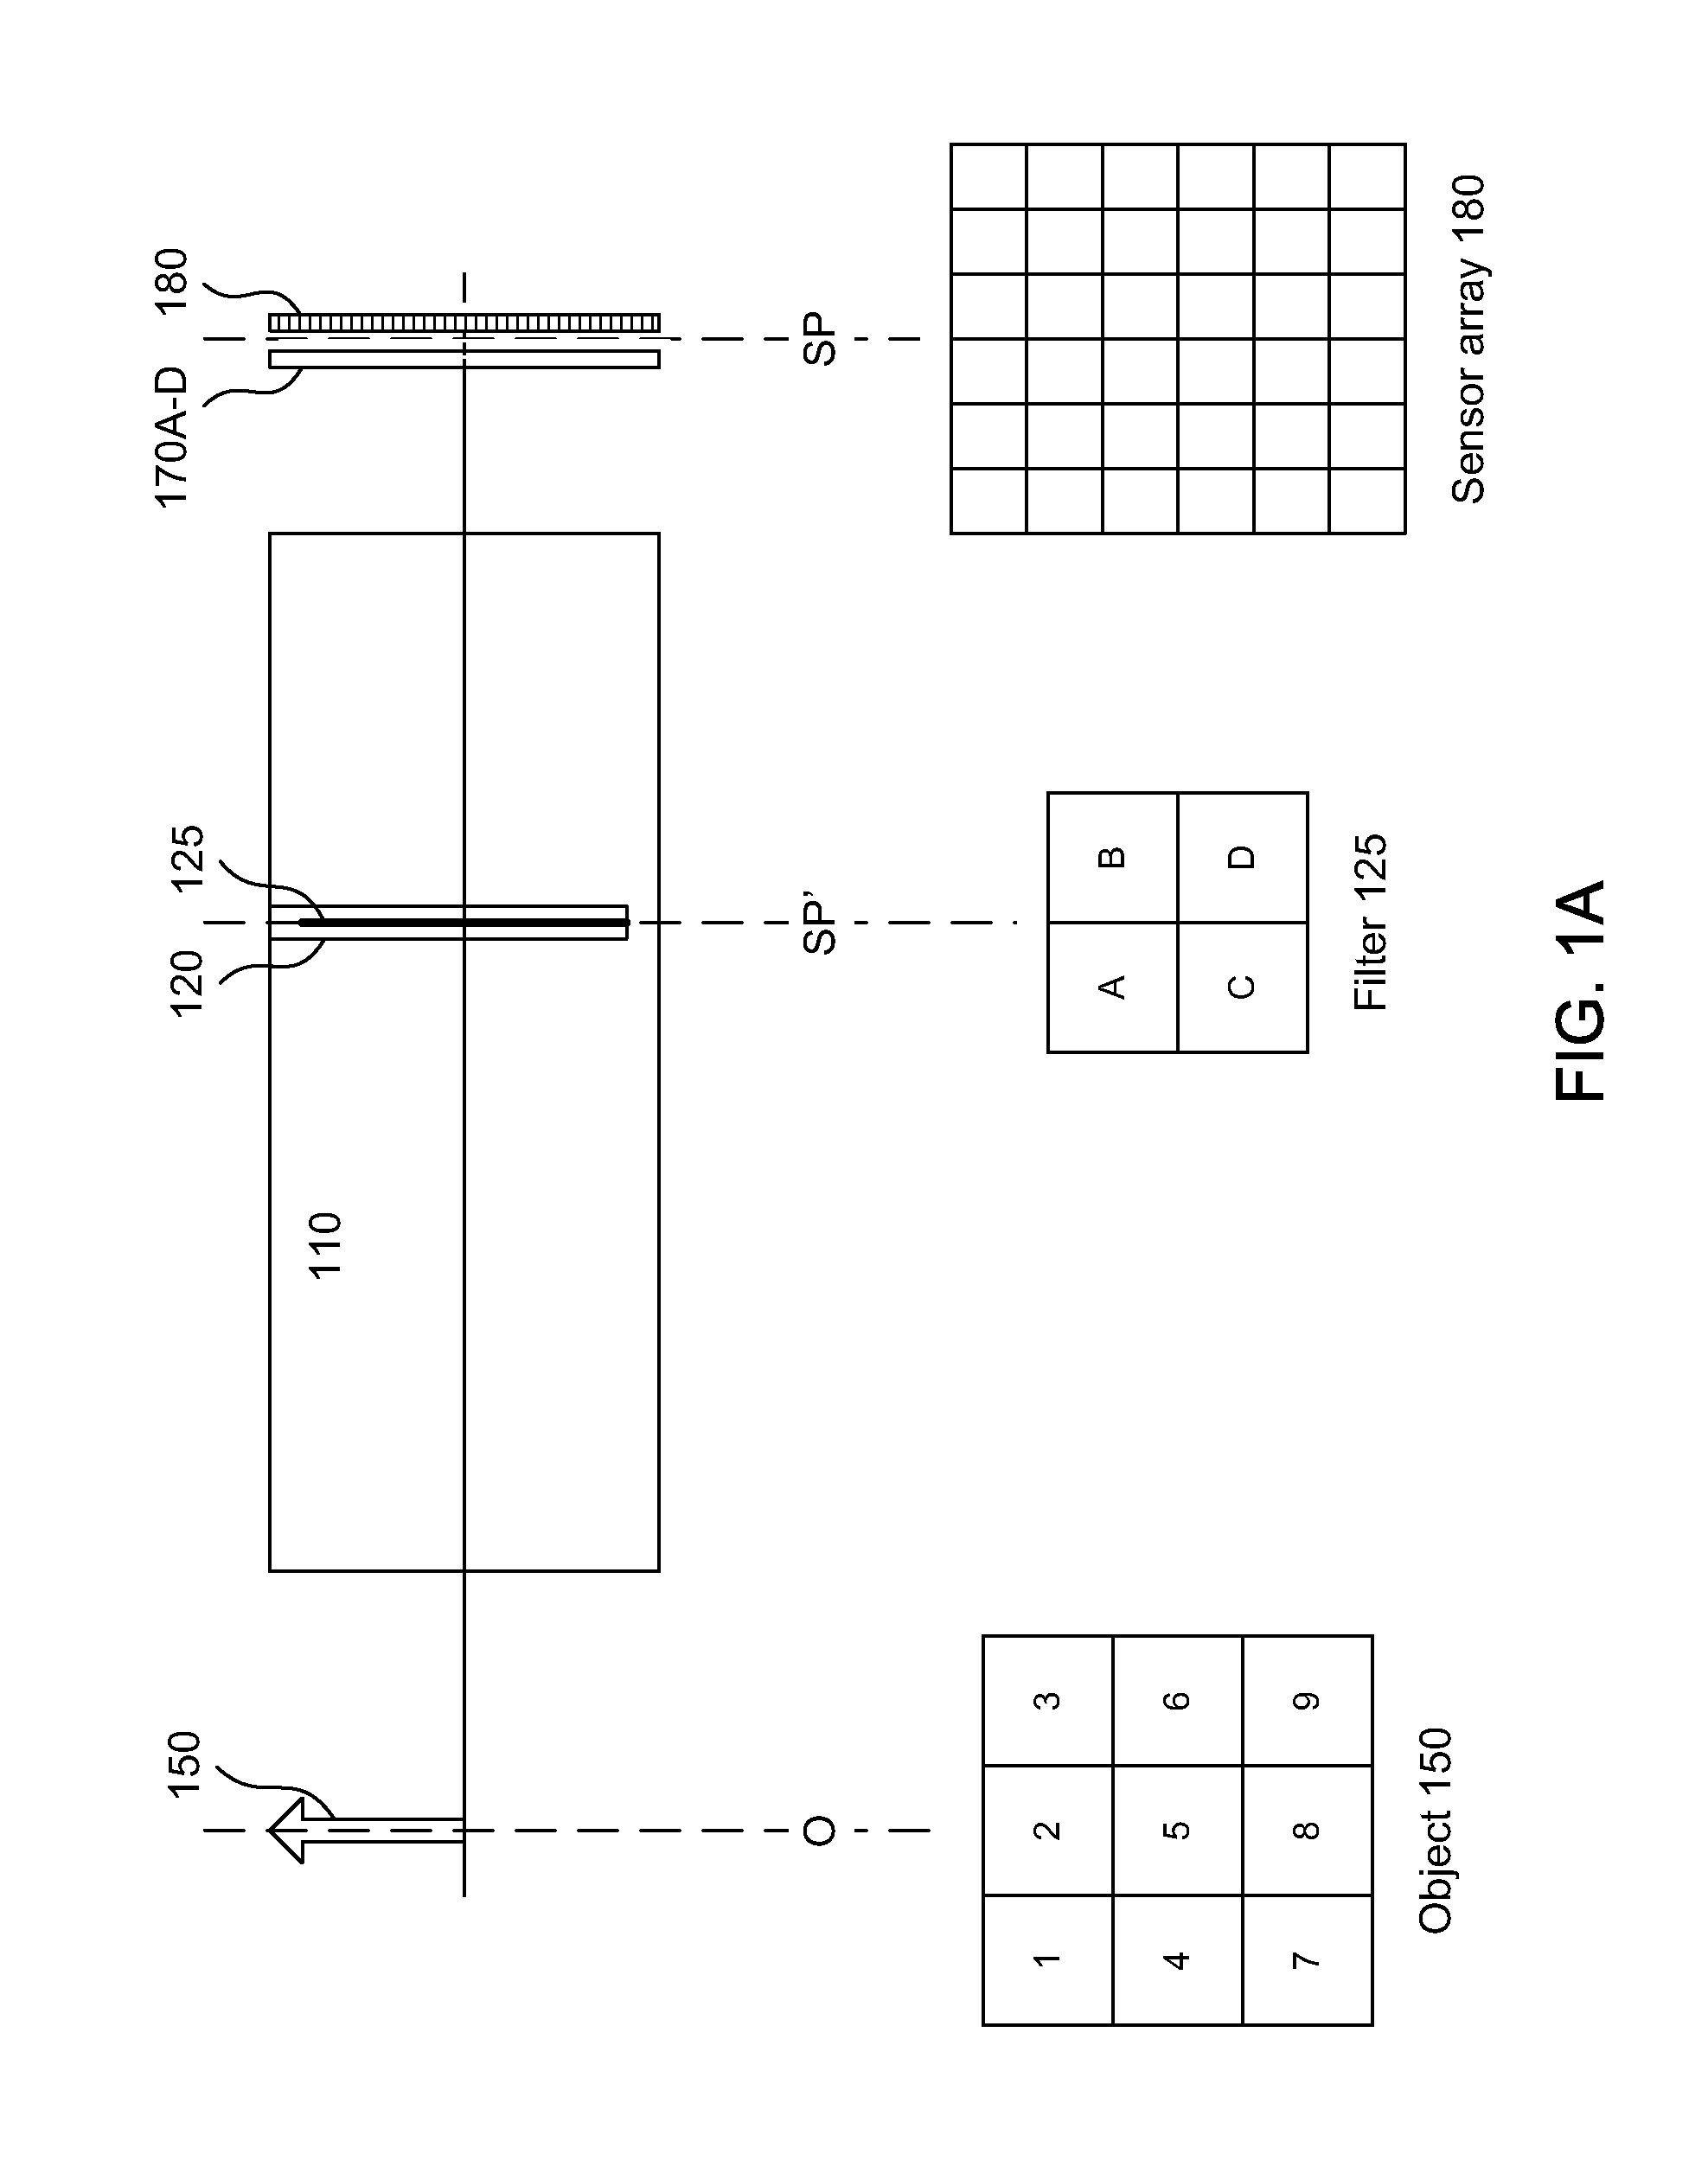 Multi-imaging System with Interleaved Images